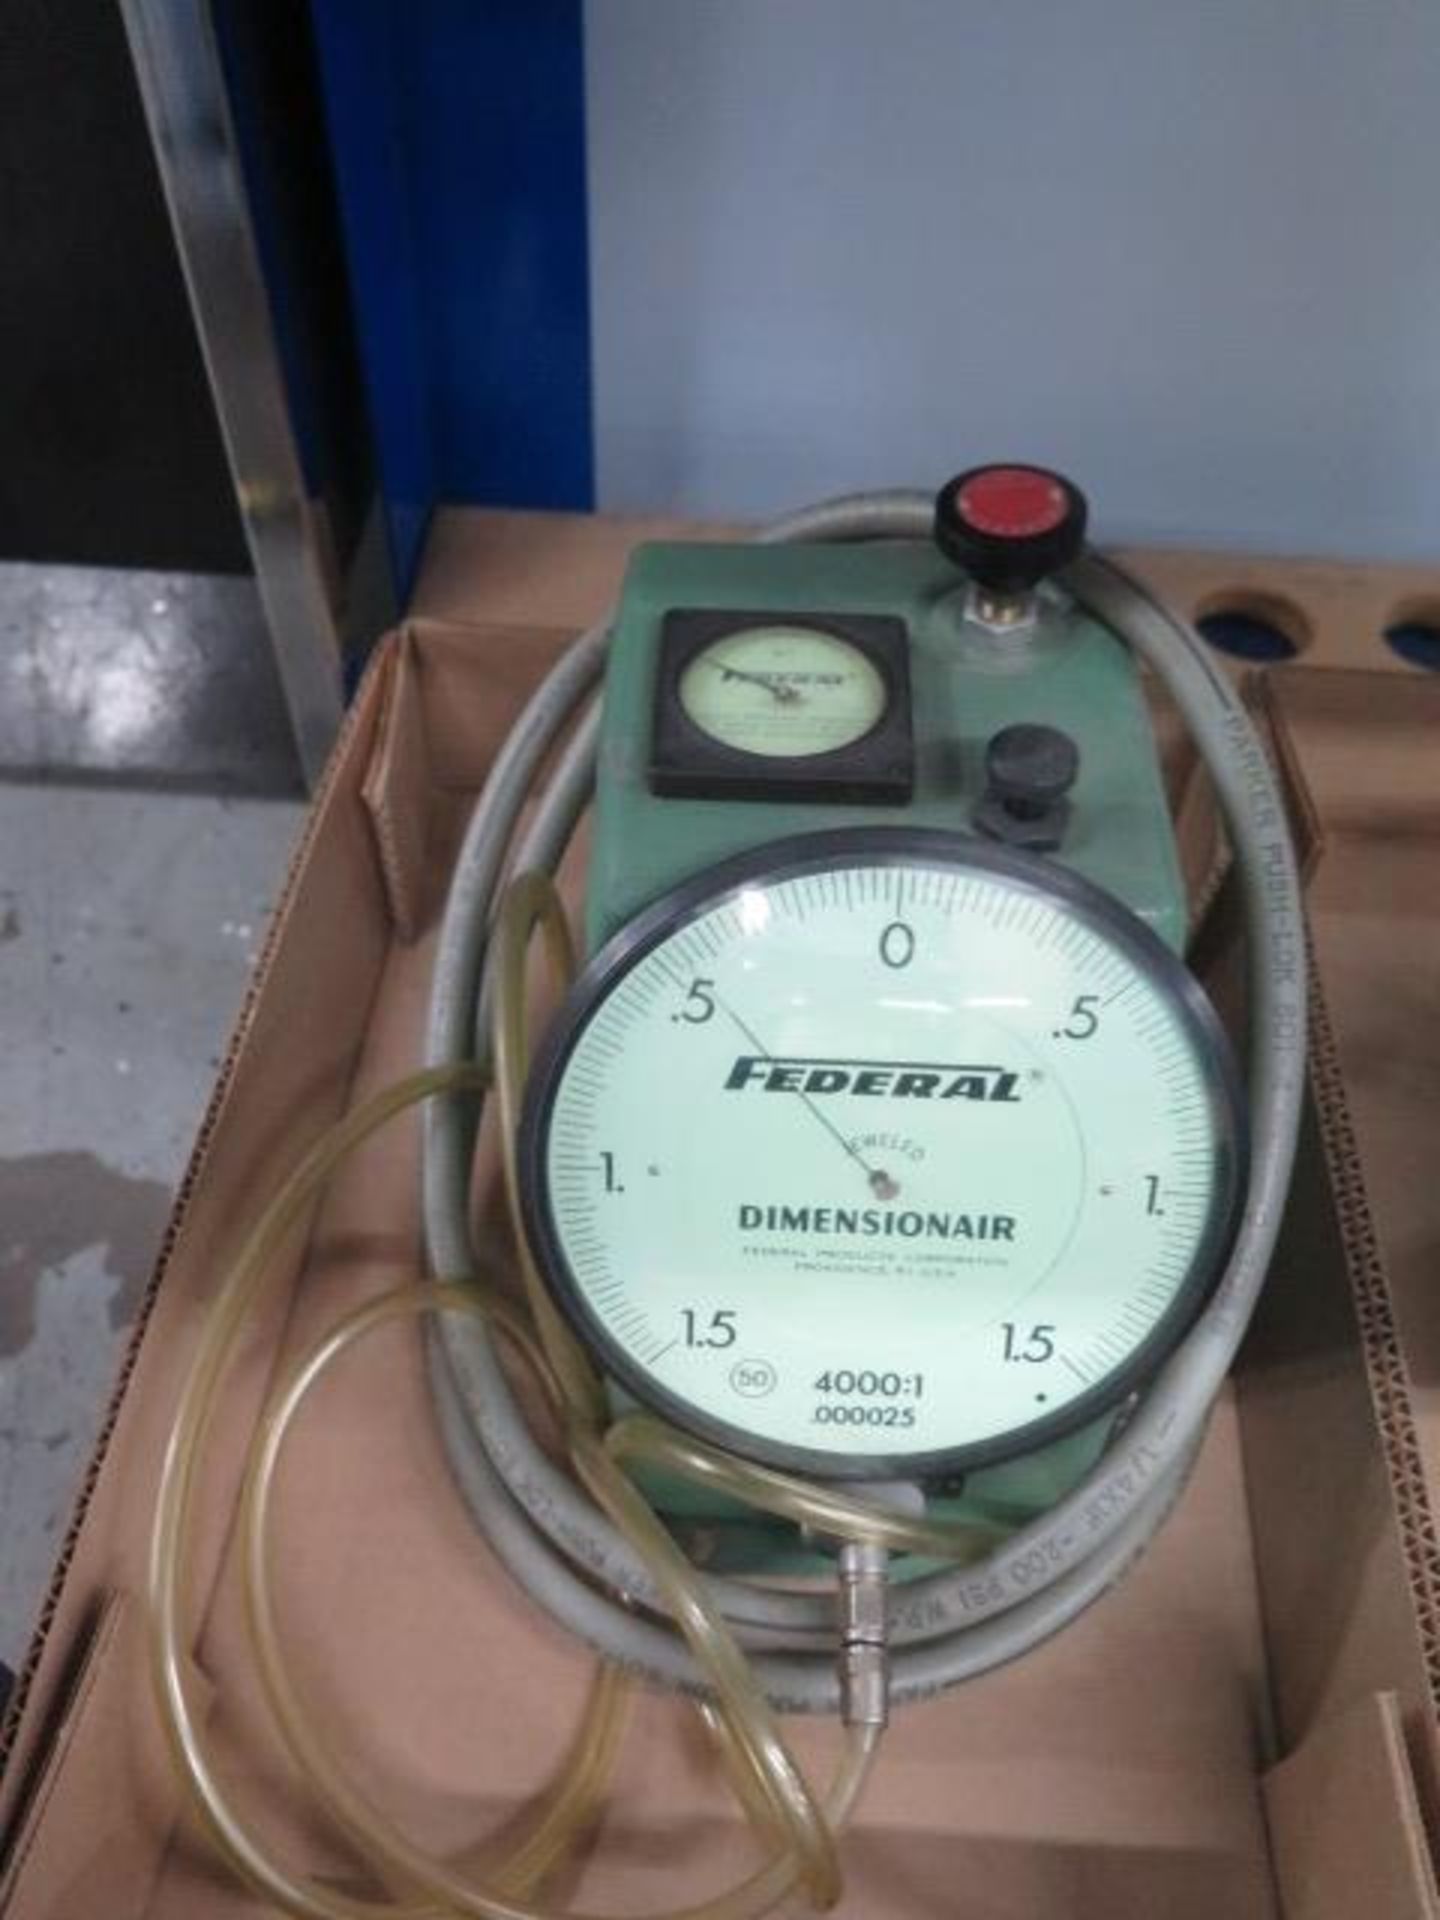 Federal Dimensionair Air Bore Gage (SOLD AS-IS - NO WARRANTY) - Image 2 of 4